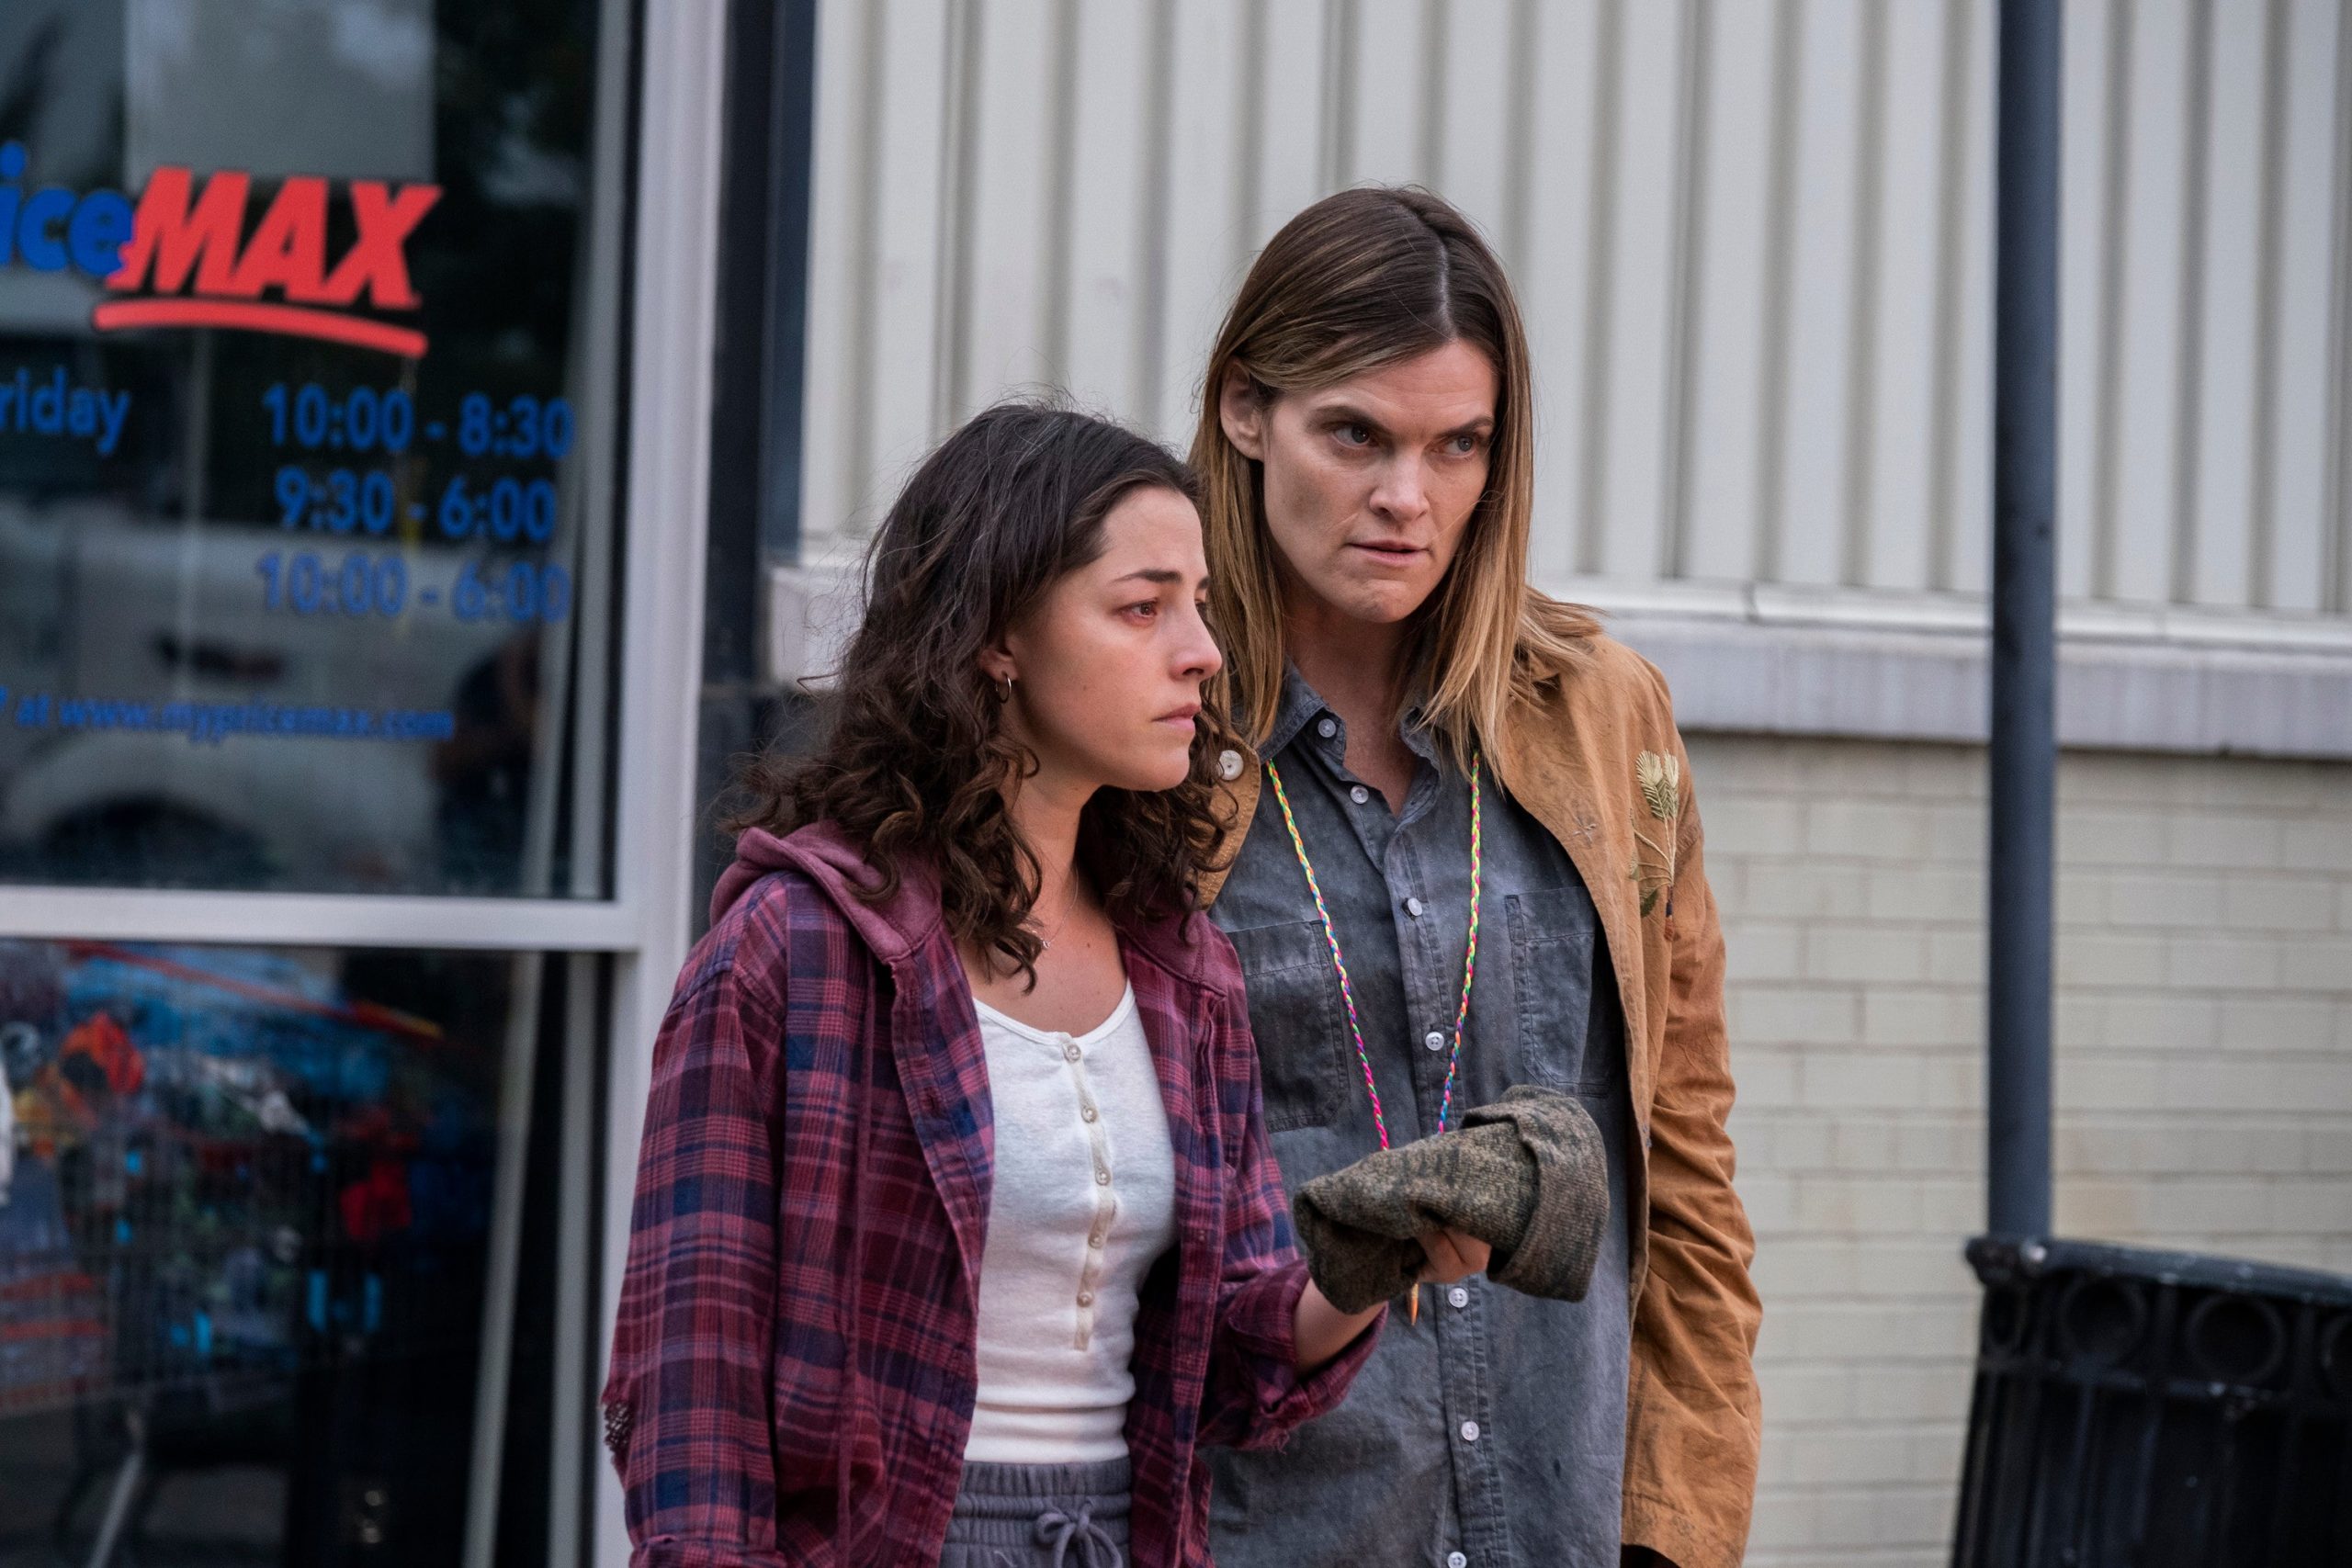 Olivia Thirlby as Hero Brown, Missi Pyle as Roxanne.  (Photo: Rafy/FX)